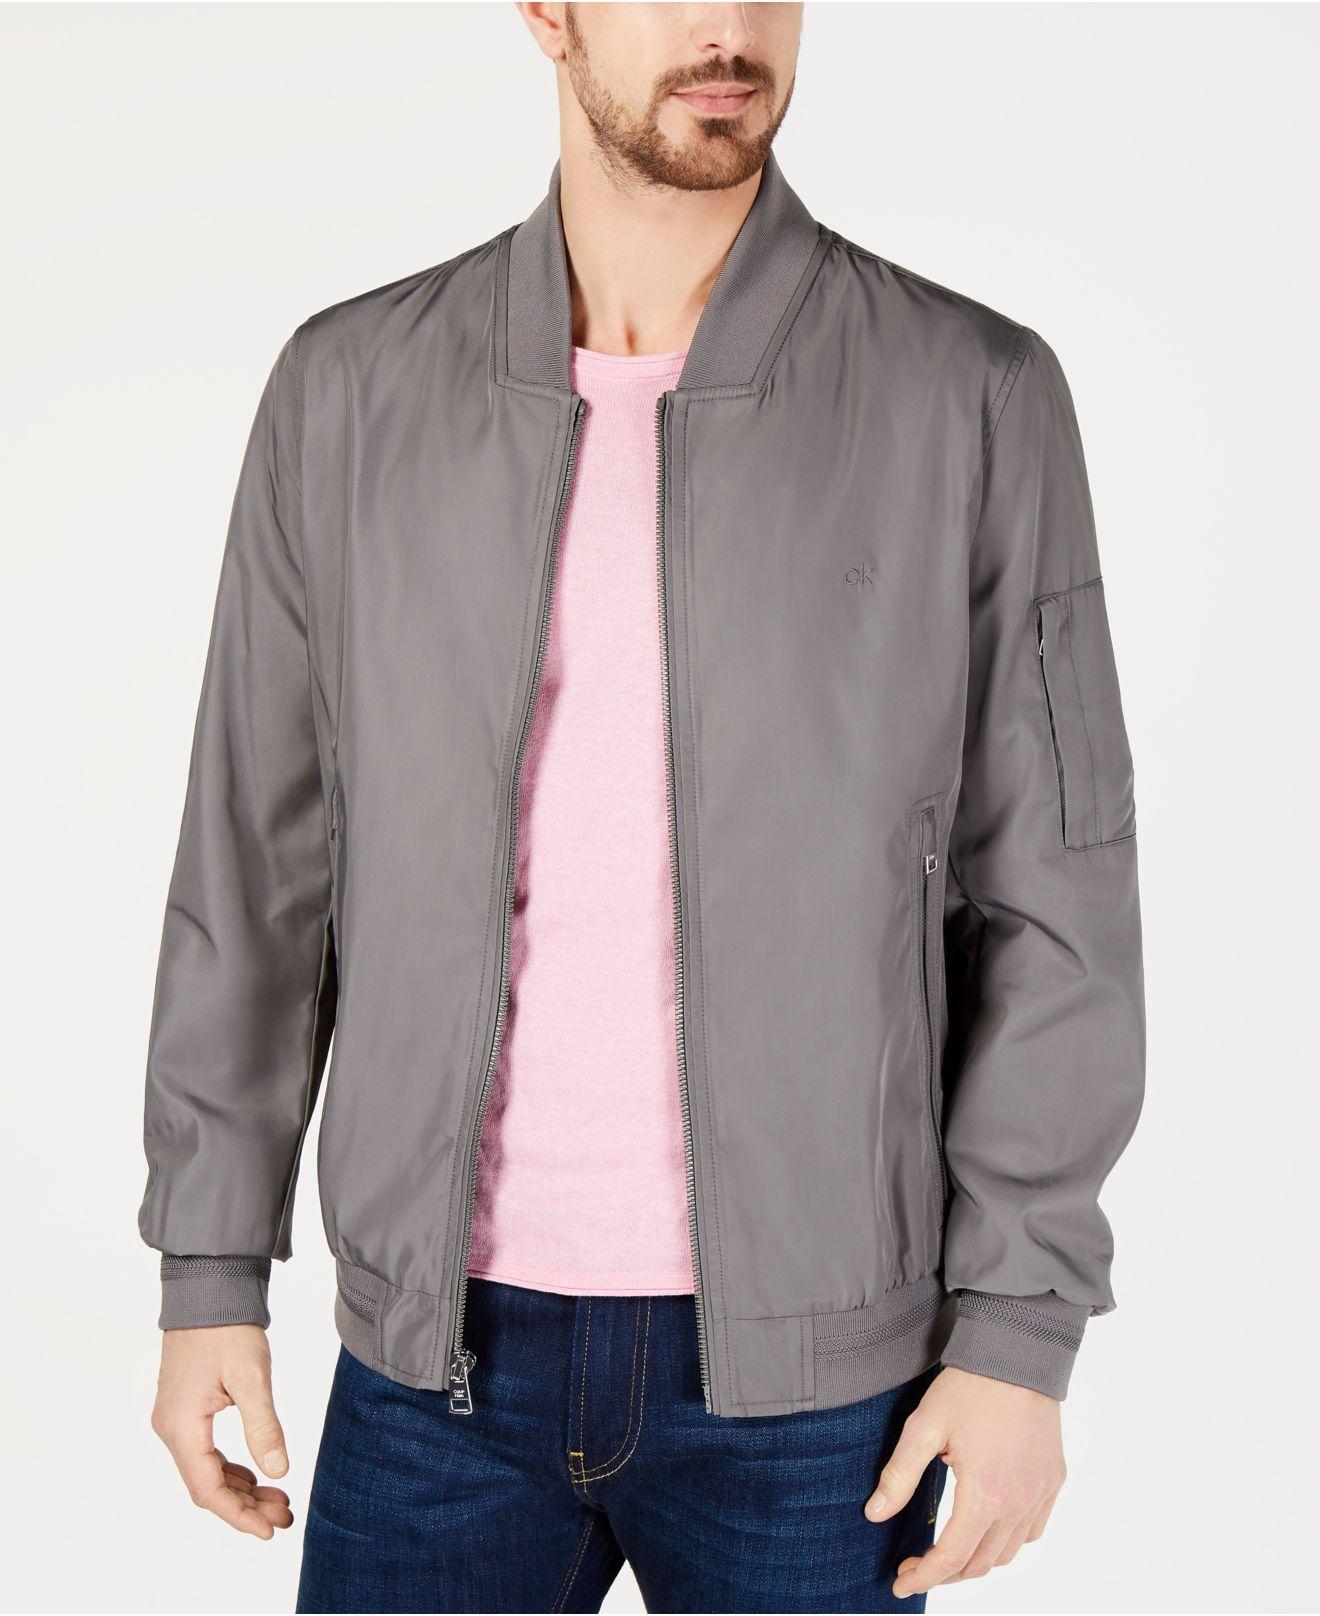 Calvin Klein Synthetic Flight Bomber Jacket in Gray for Men - Save 3% ...